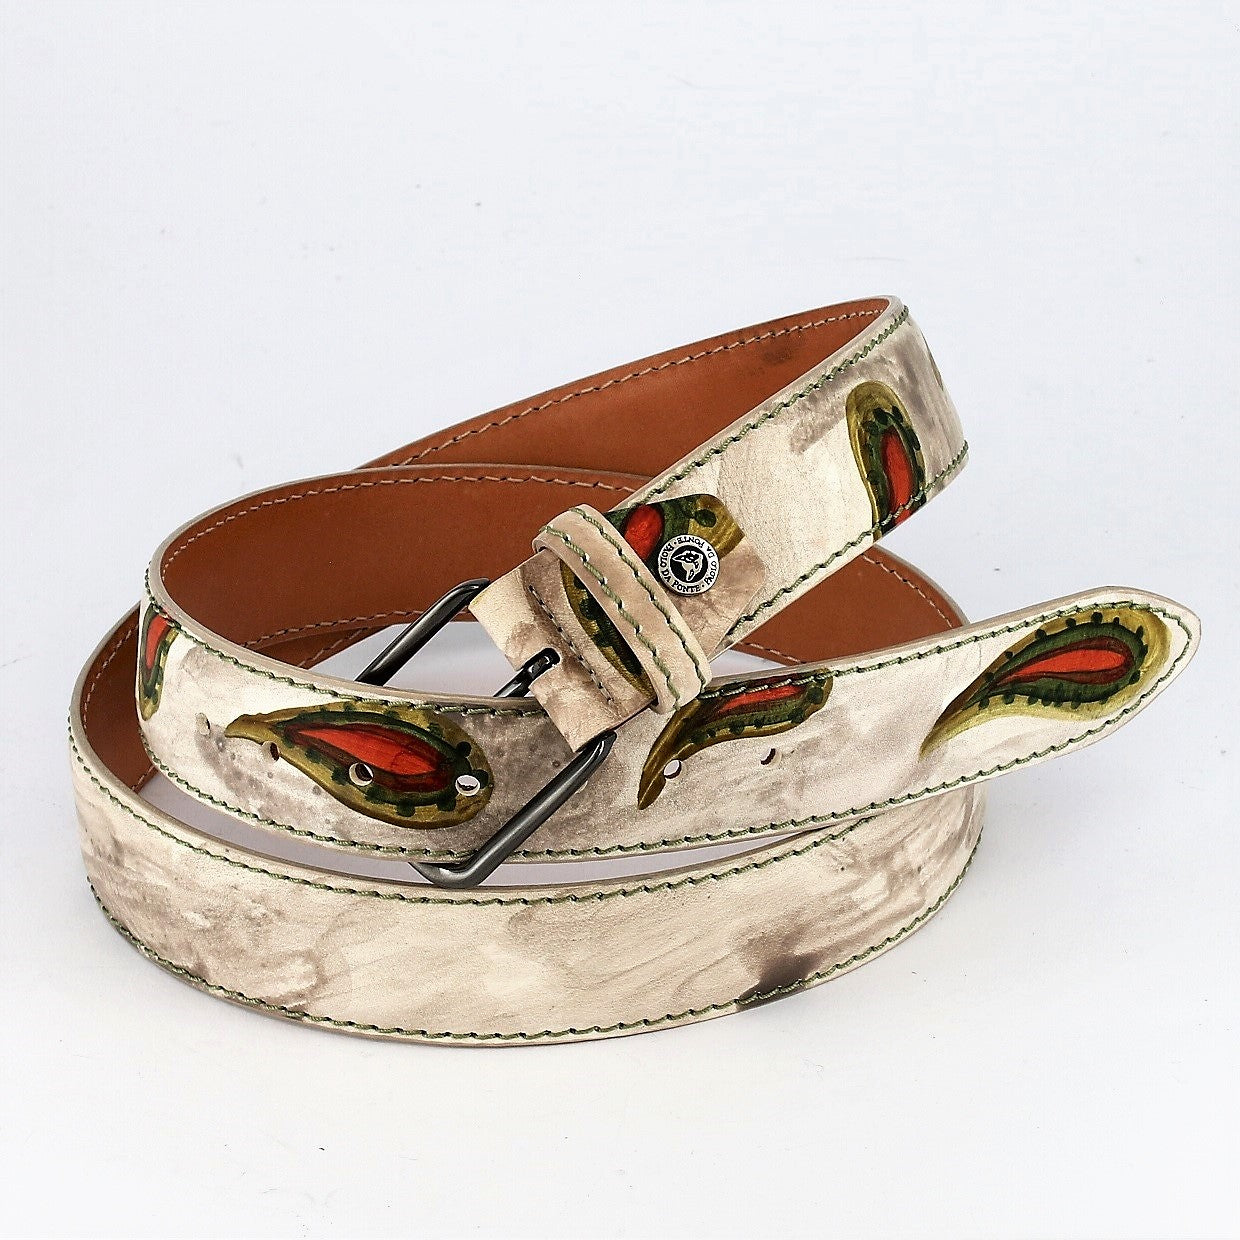 belt with a paisley pattern, green and red leafs on white background